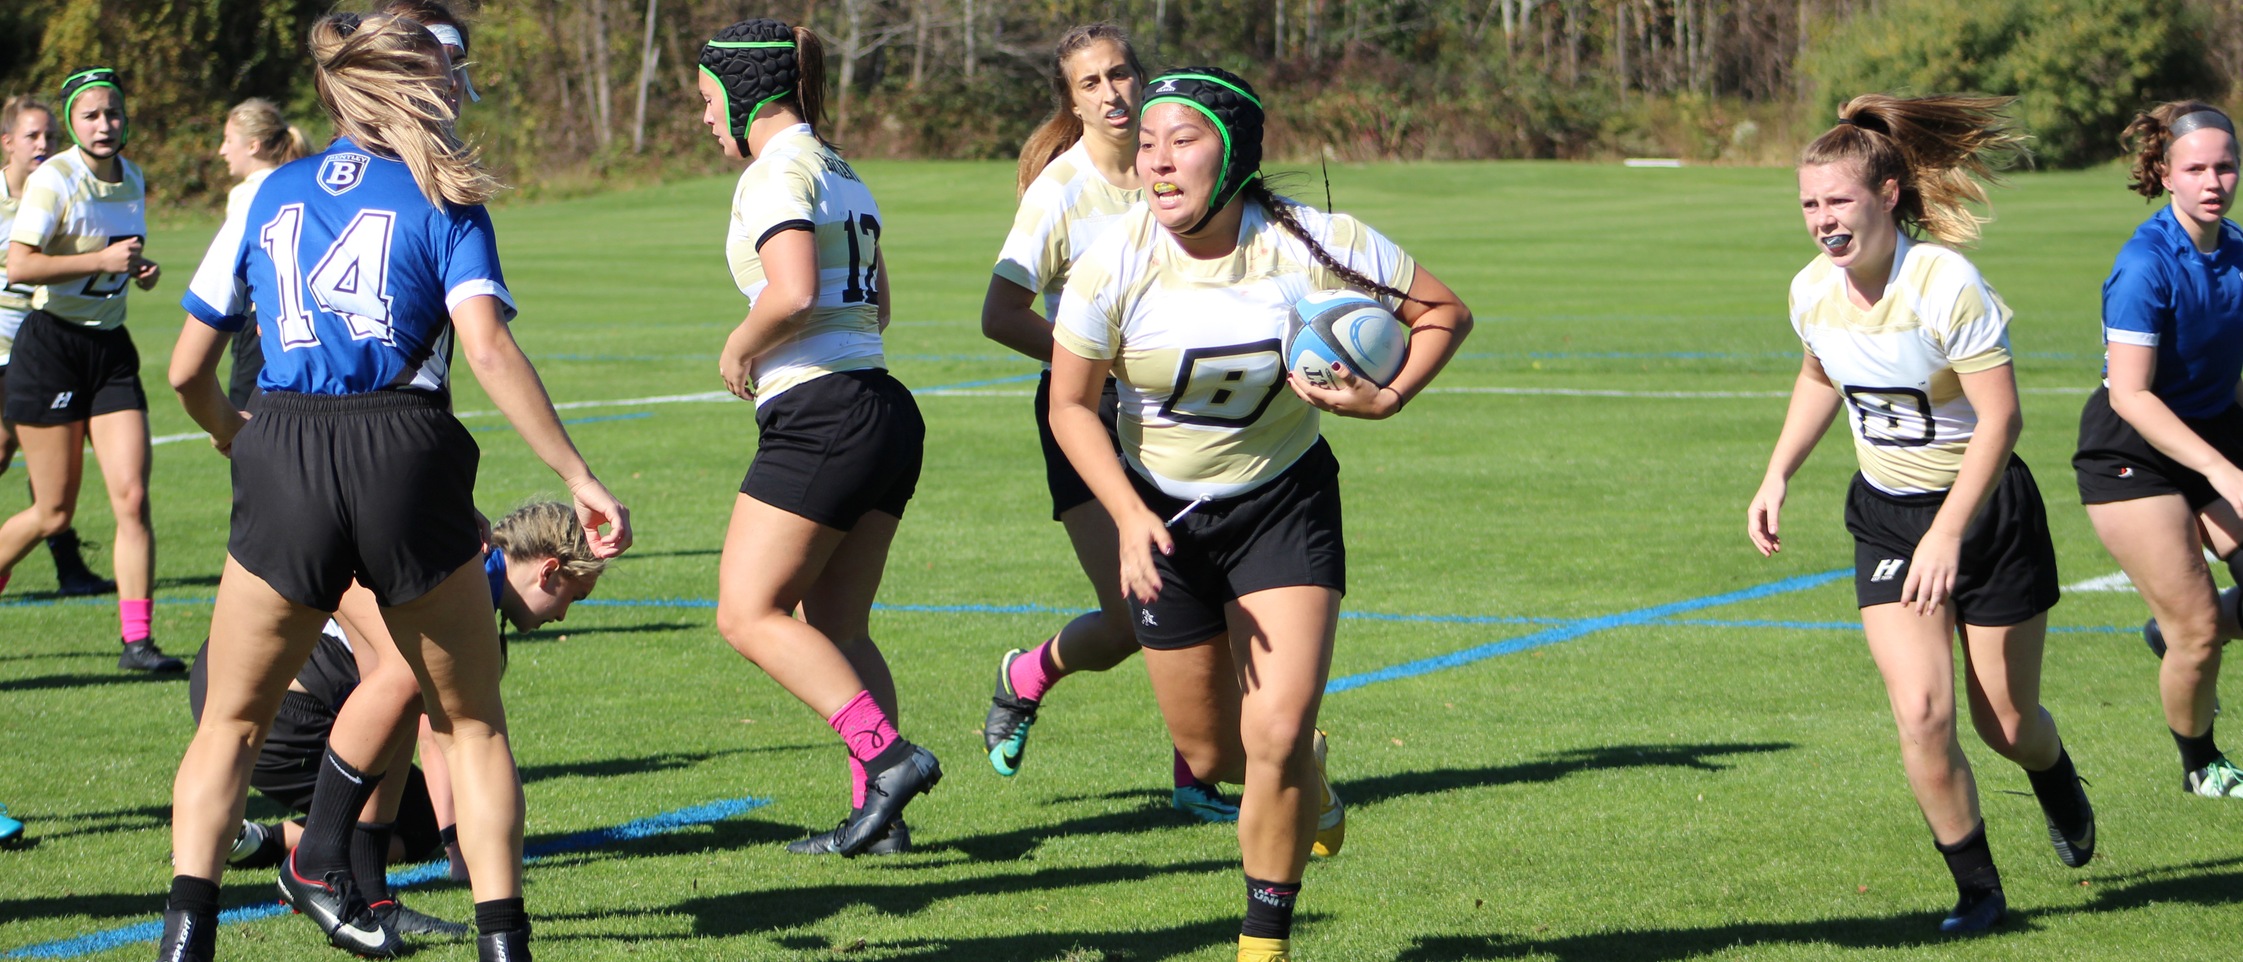 WOMEN’S RUGBY LIGHTS UP 7S TOURNAMENT